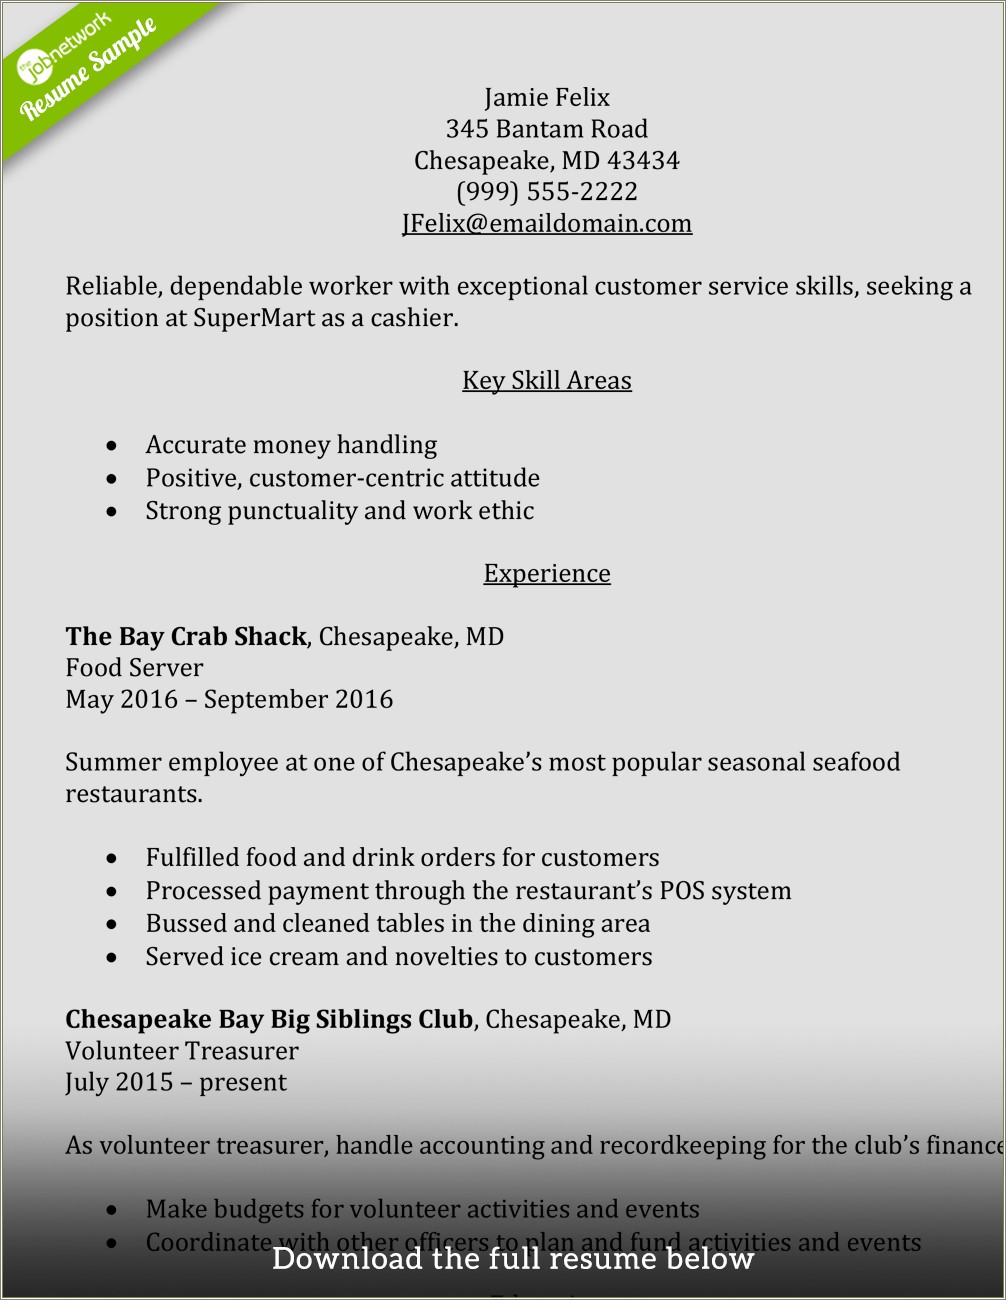 Resume For Ice Cream Worker Application